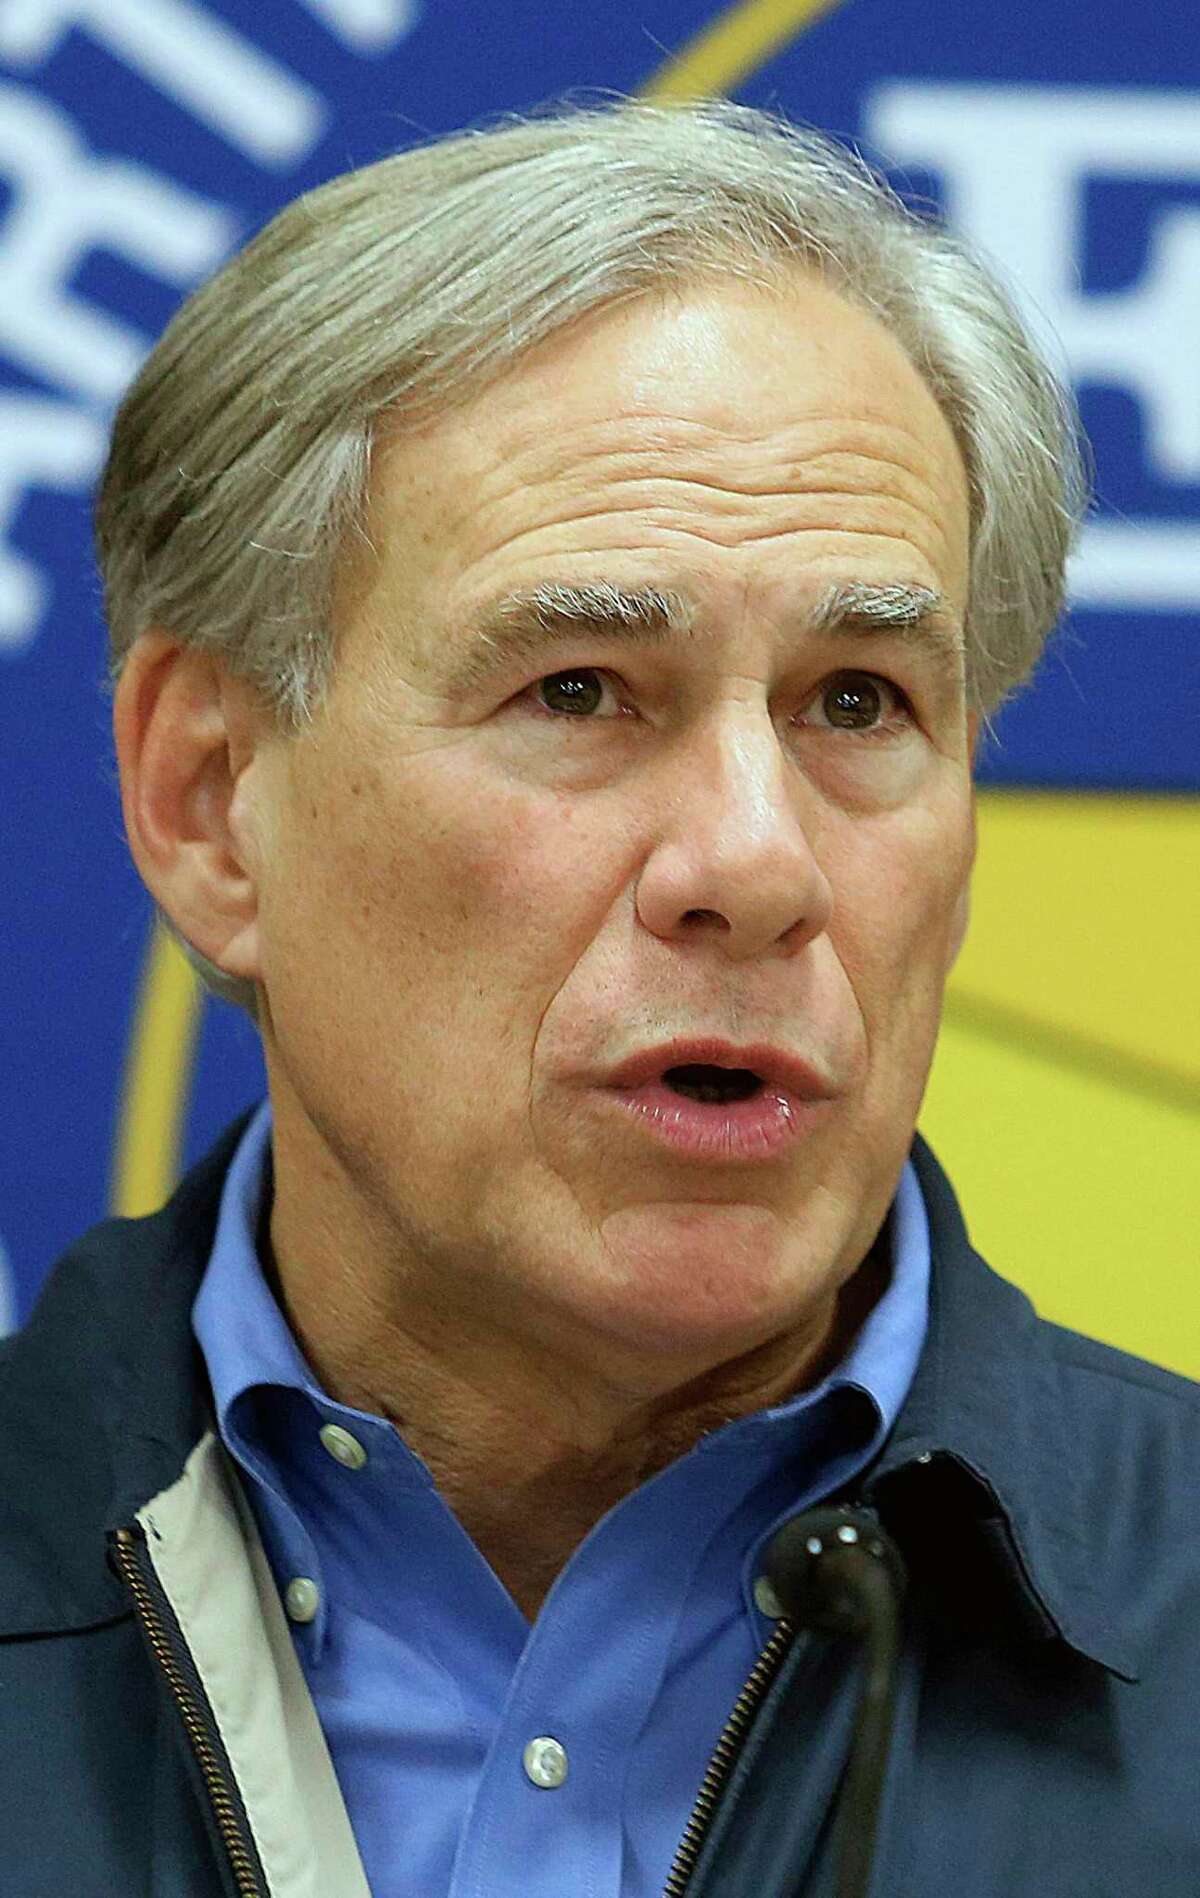 Gov. Greg Abbott, while celebrating the Supreme Court decision overturning Roe v. Wade, touted a law that extended Medicaid health care coverage for pregnant women until six months after they give birth or miscarry, exceeding the federal government’s requirement that states provide at least two months of the benefit. But even with that expansion, Texas lags behind at least 33 states.